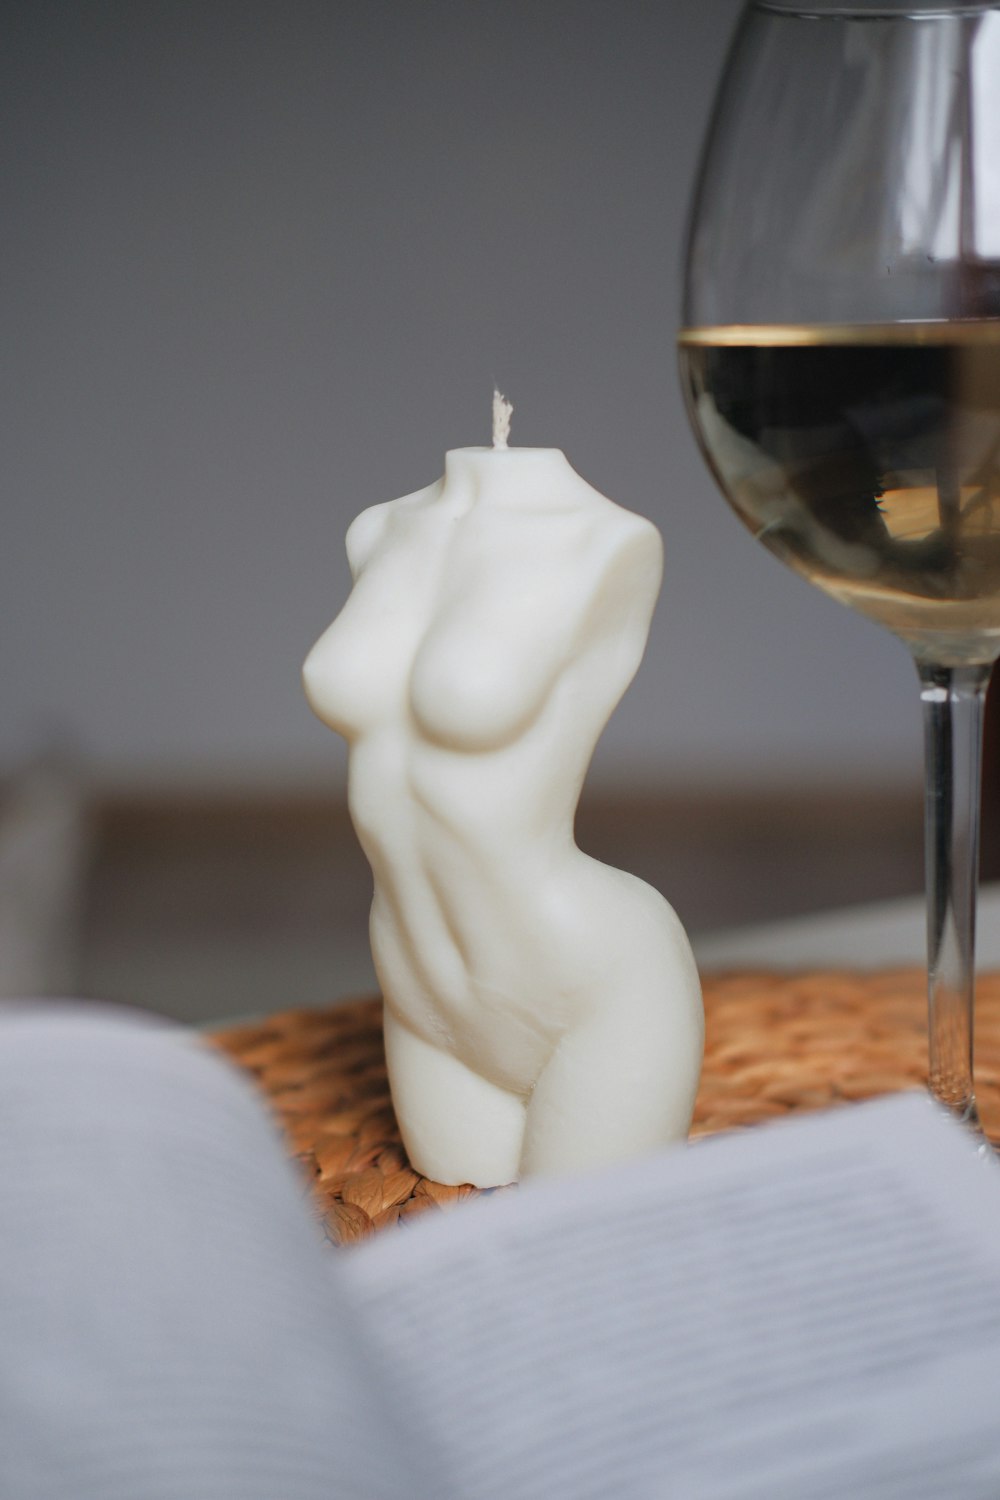 a candle that is next to a glass of wine